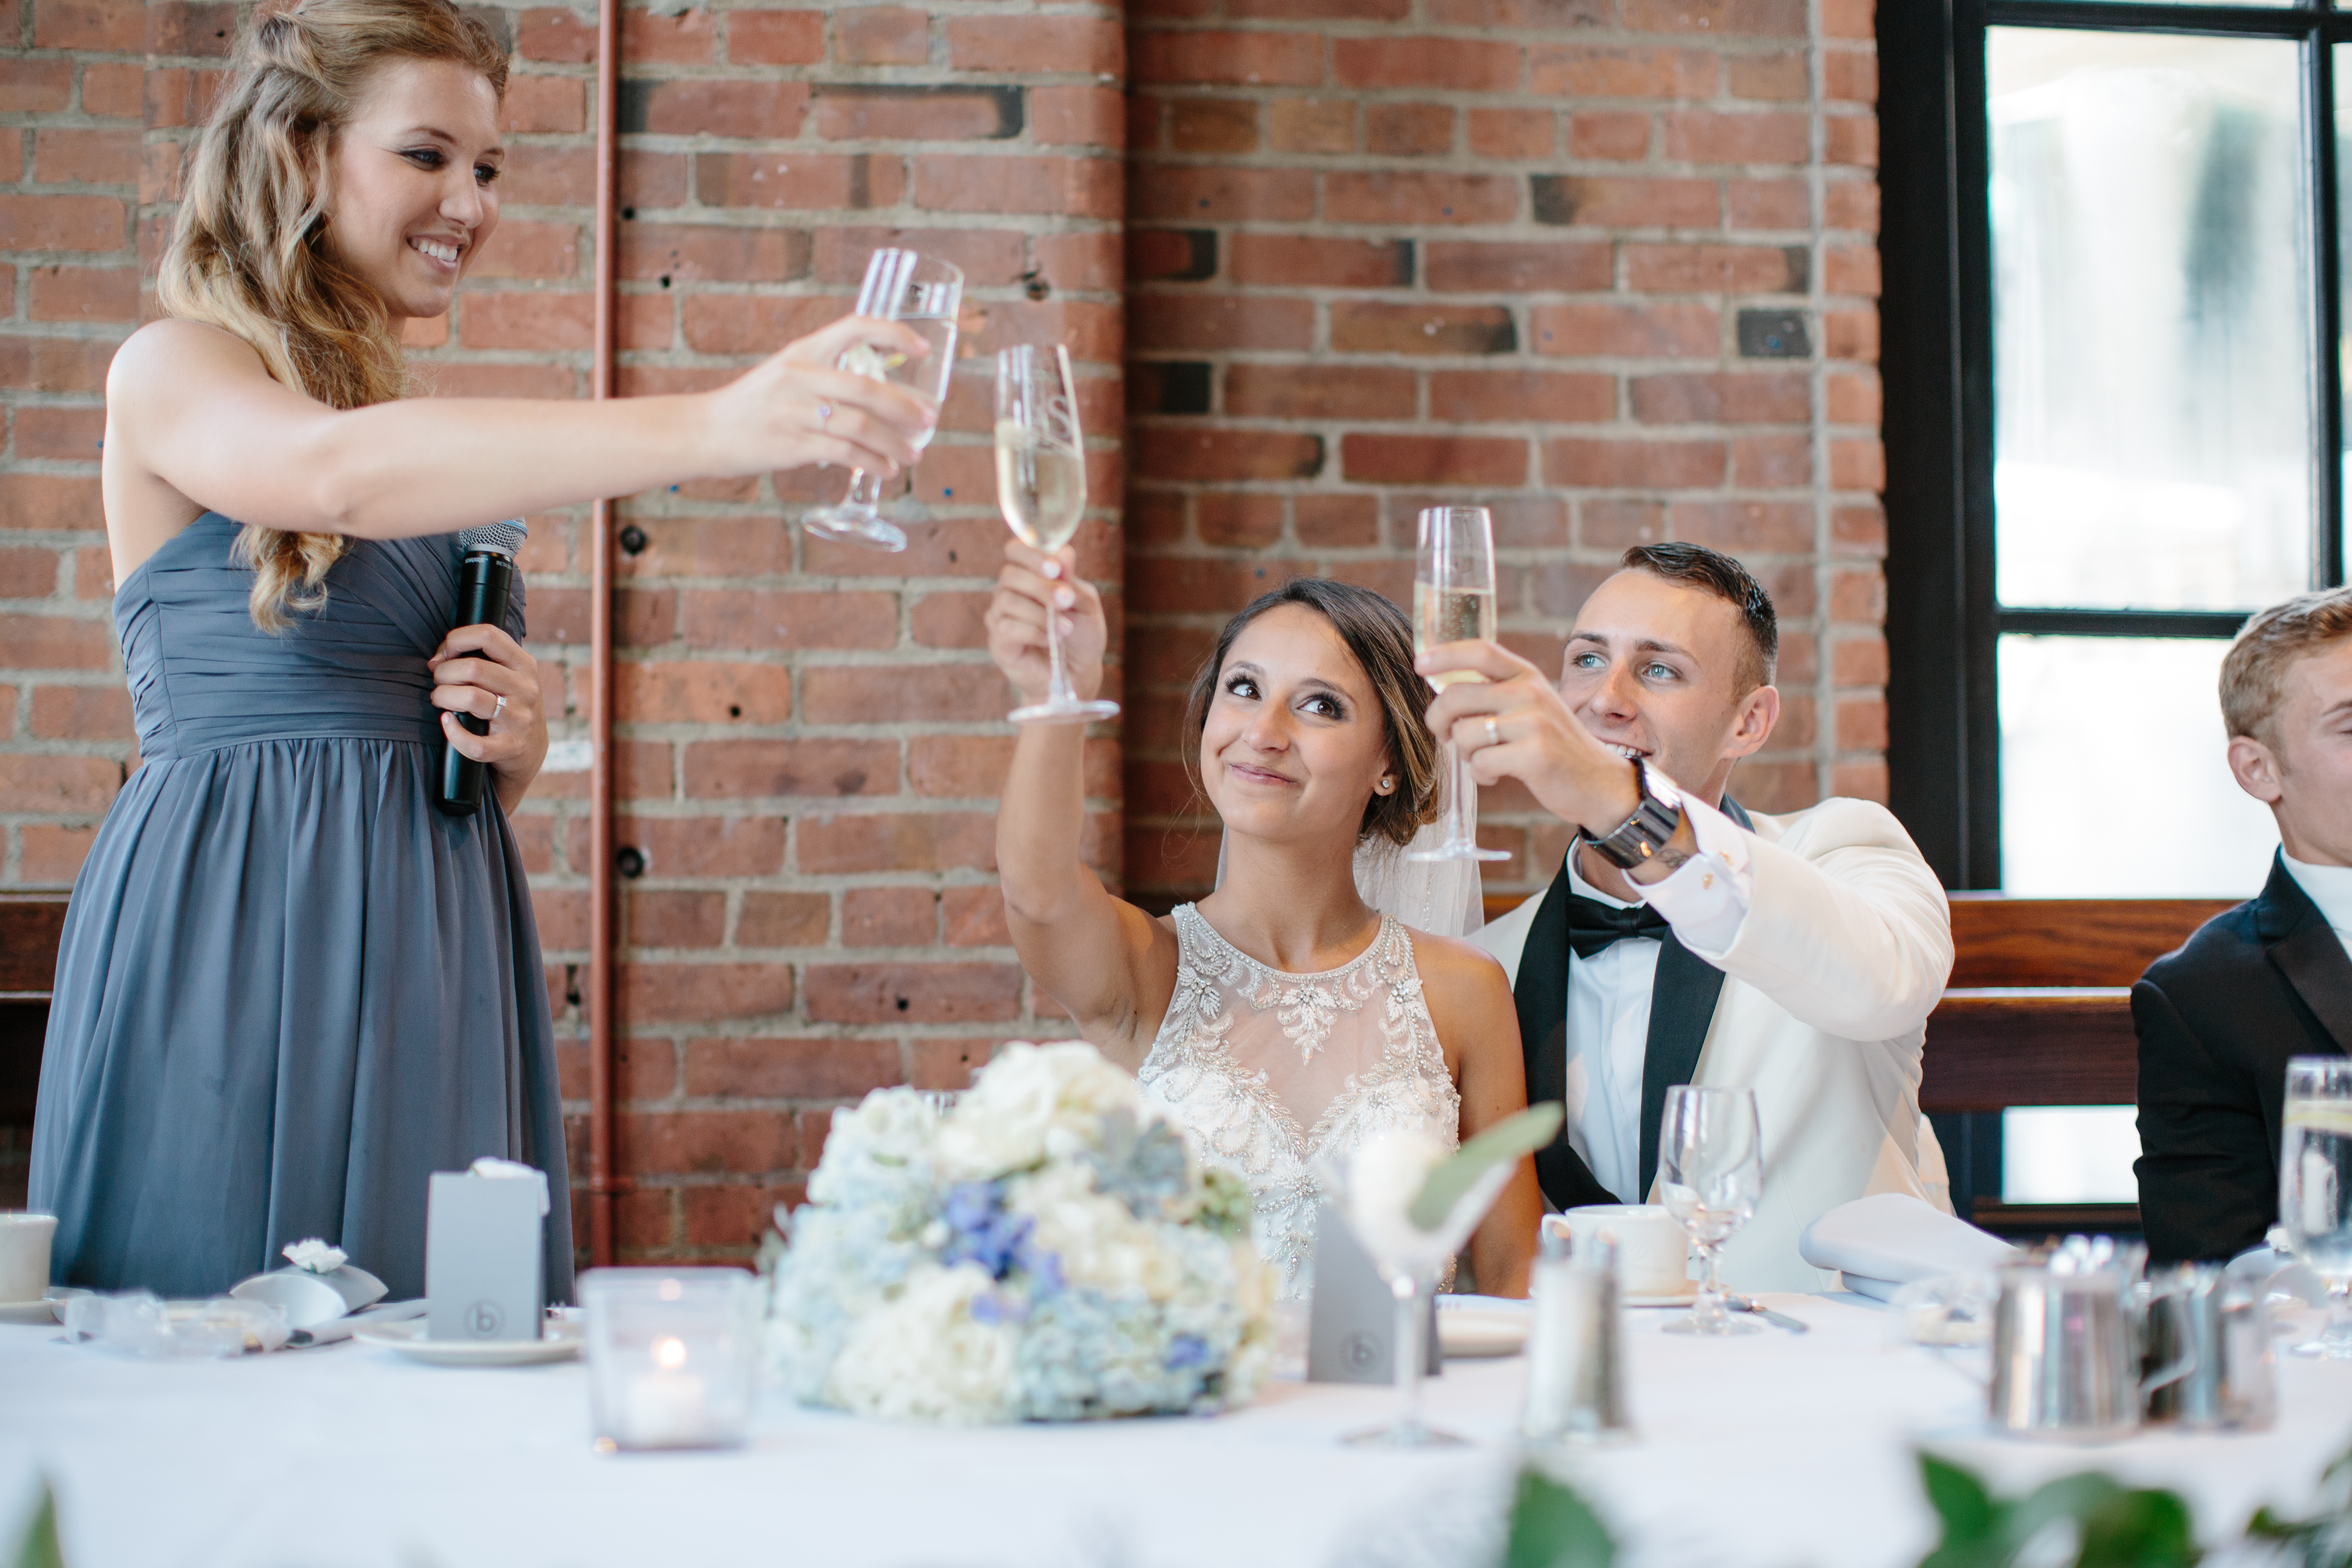 Bride and groom raise glasses to toast